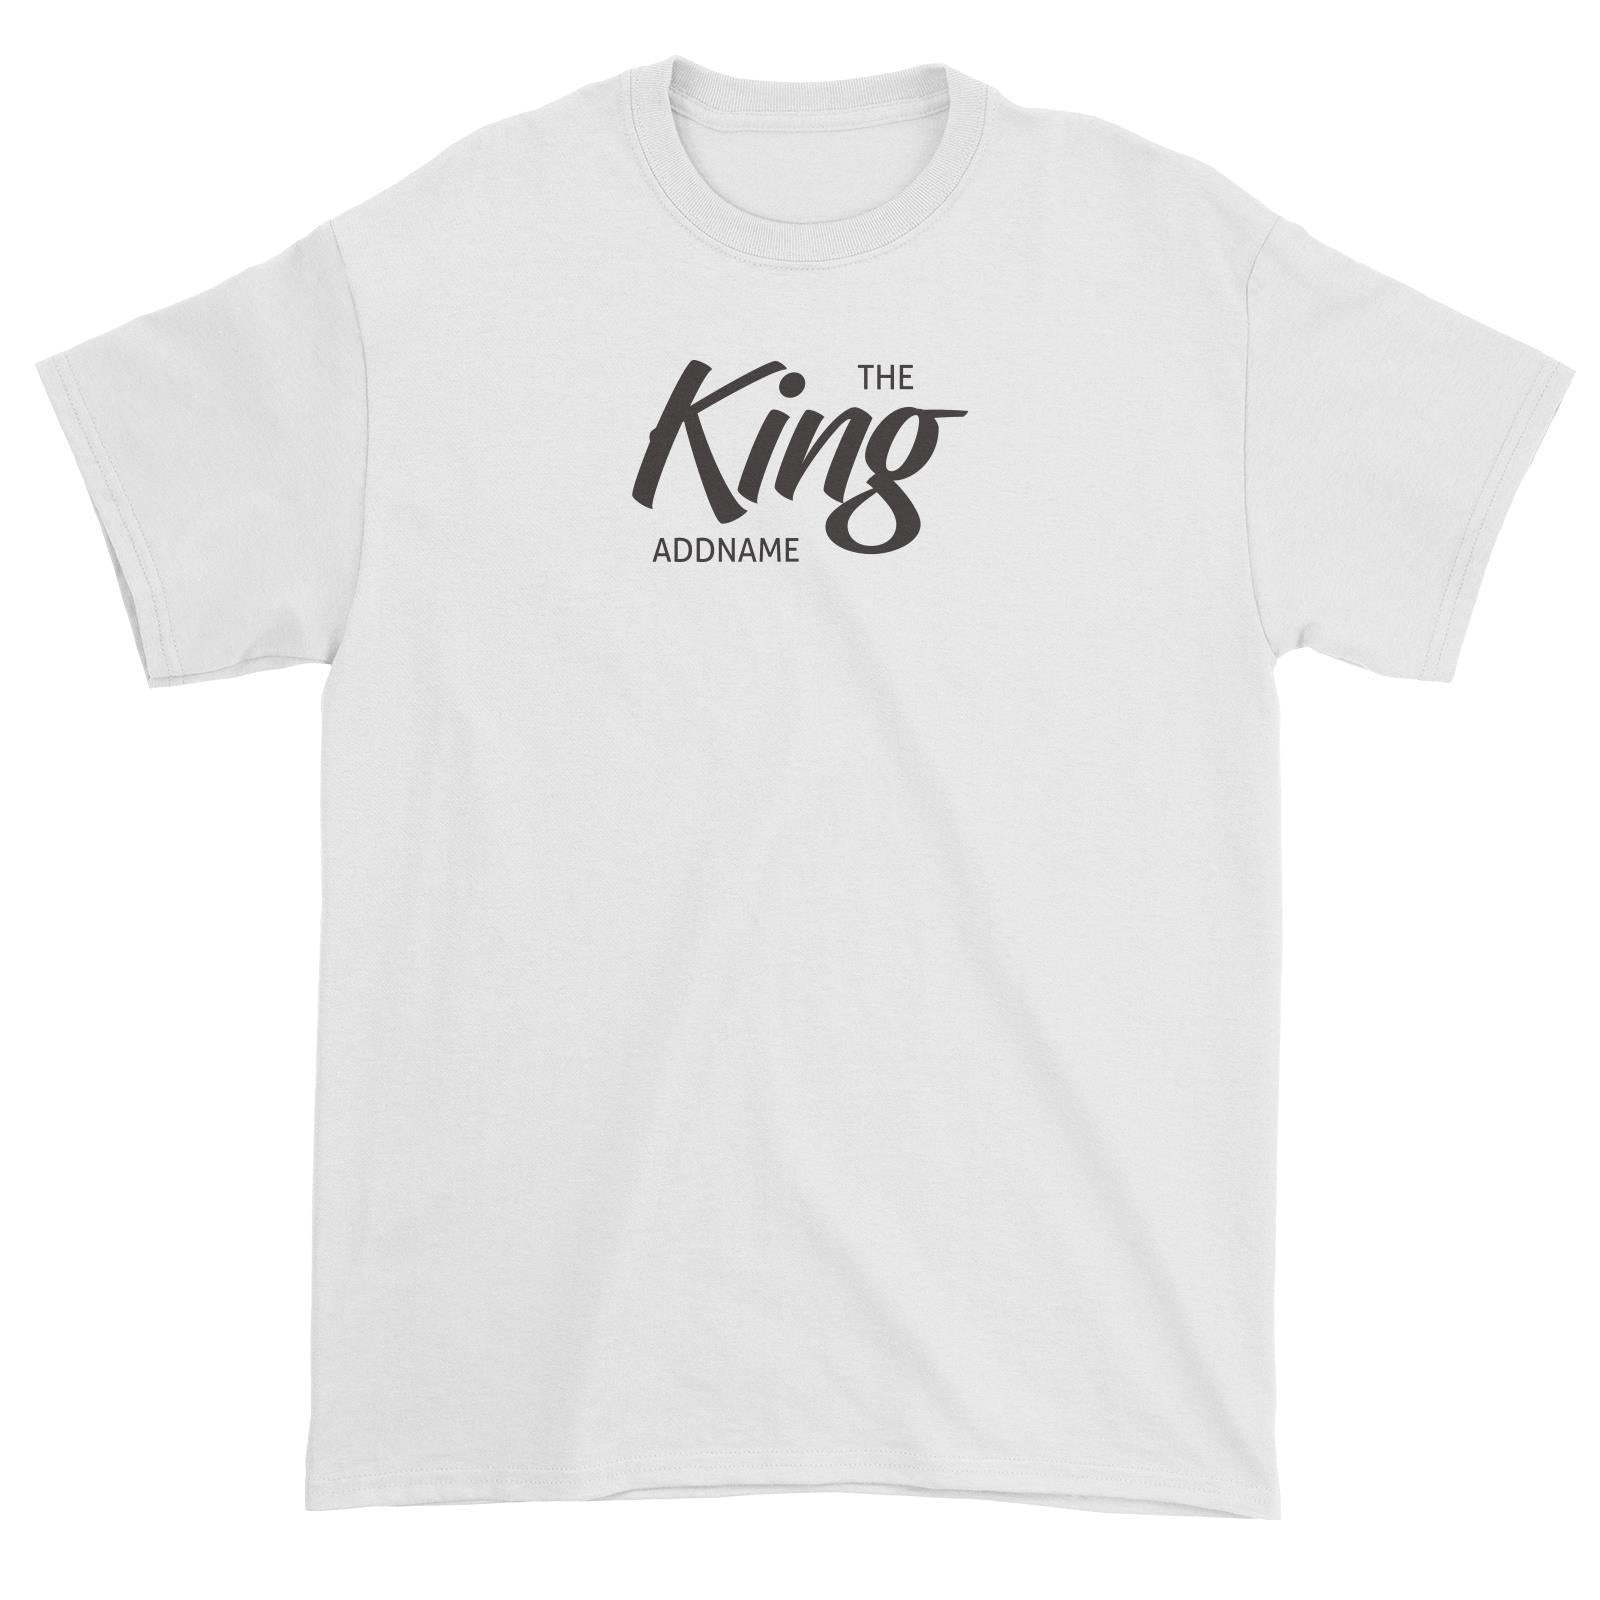 The King Addname Unisex T-Shirt Personalizable Designs Matching Family Royal Family Edition Royal Simple